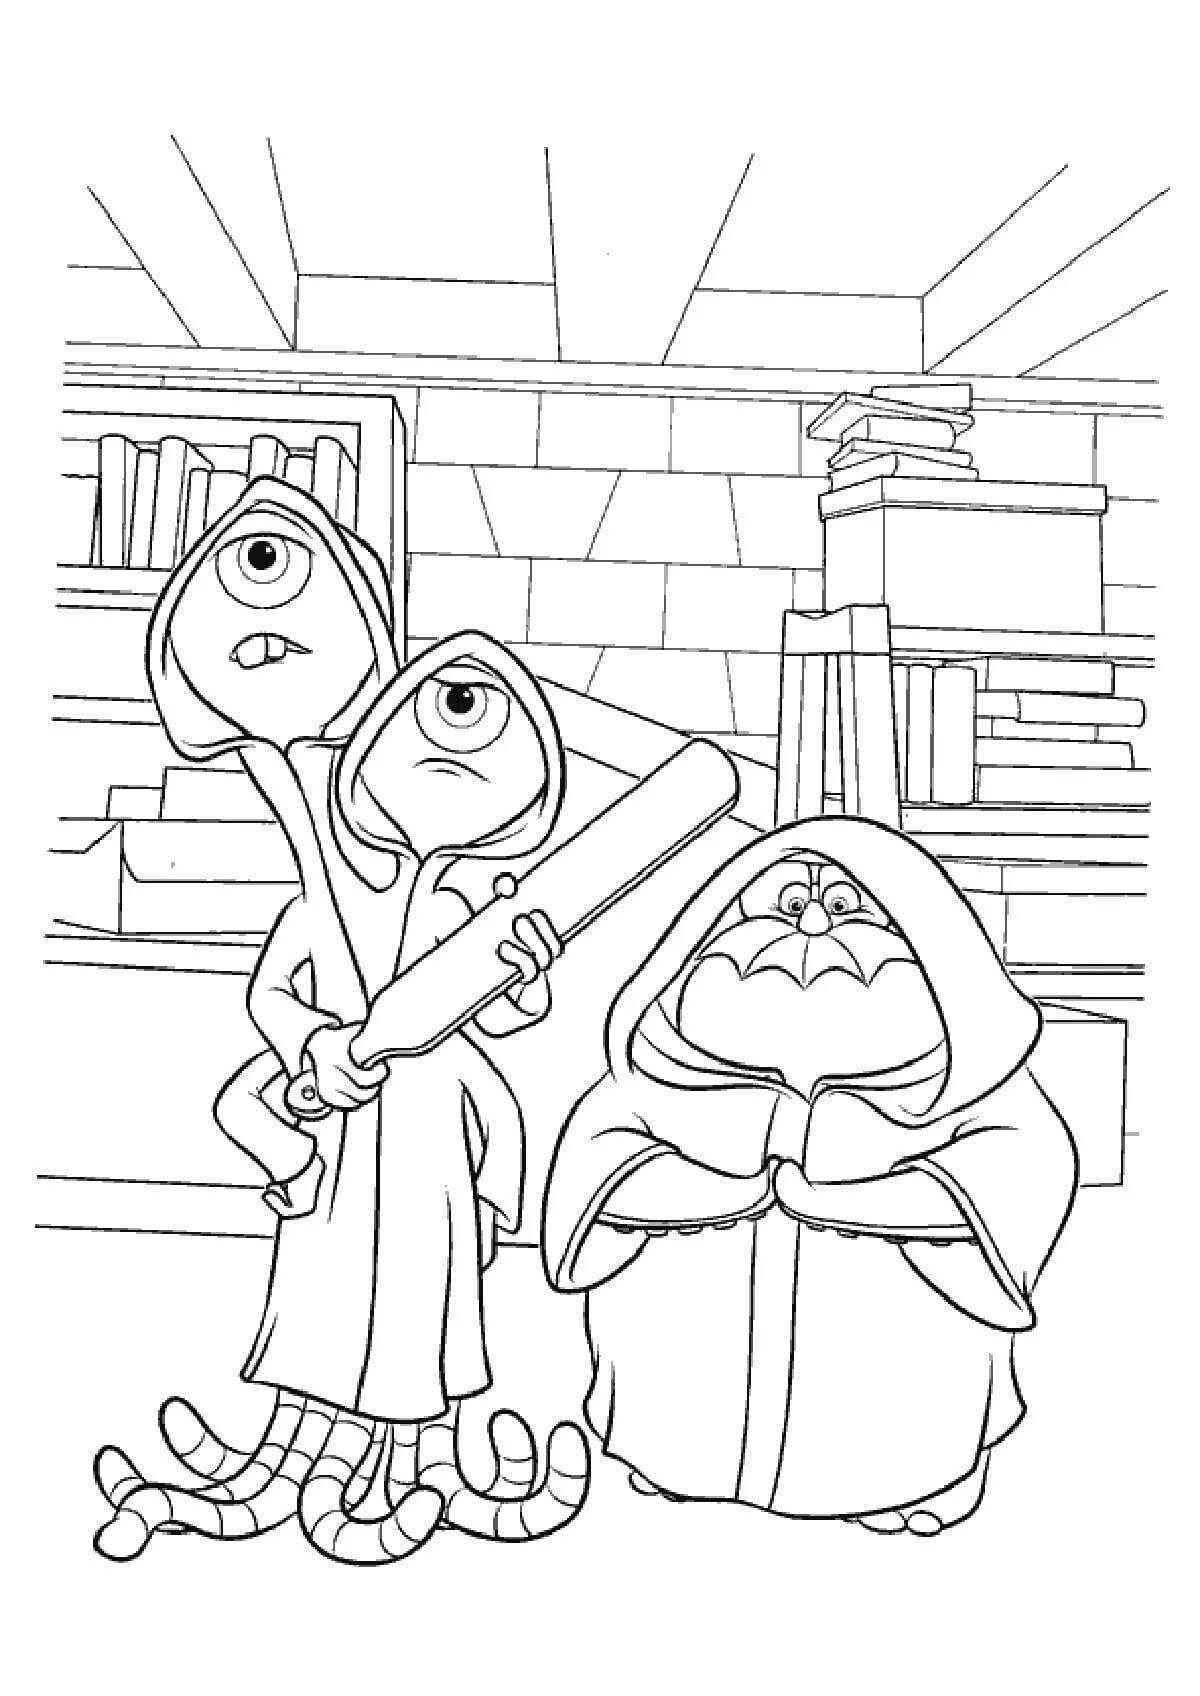 Coloring page of bright monsters university